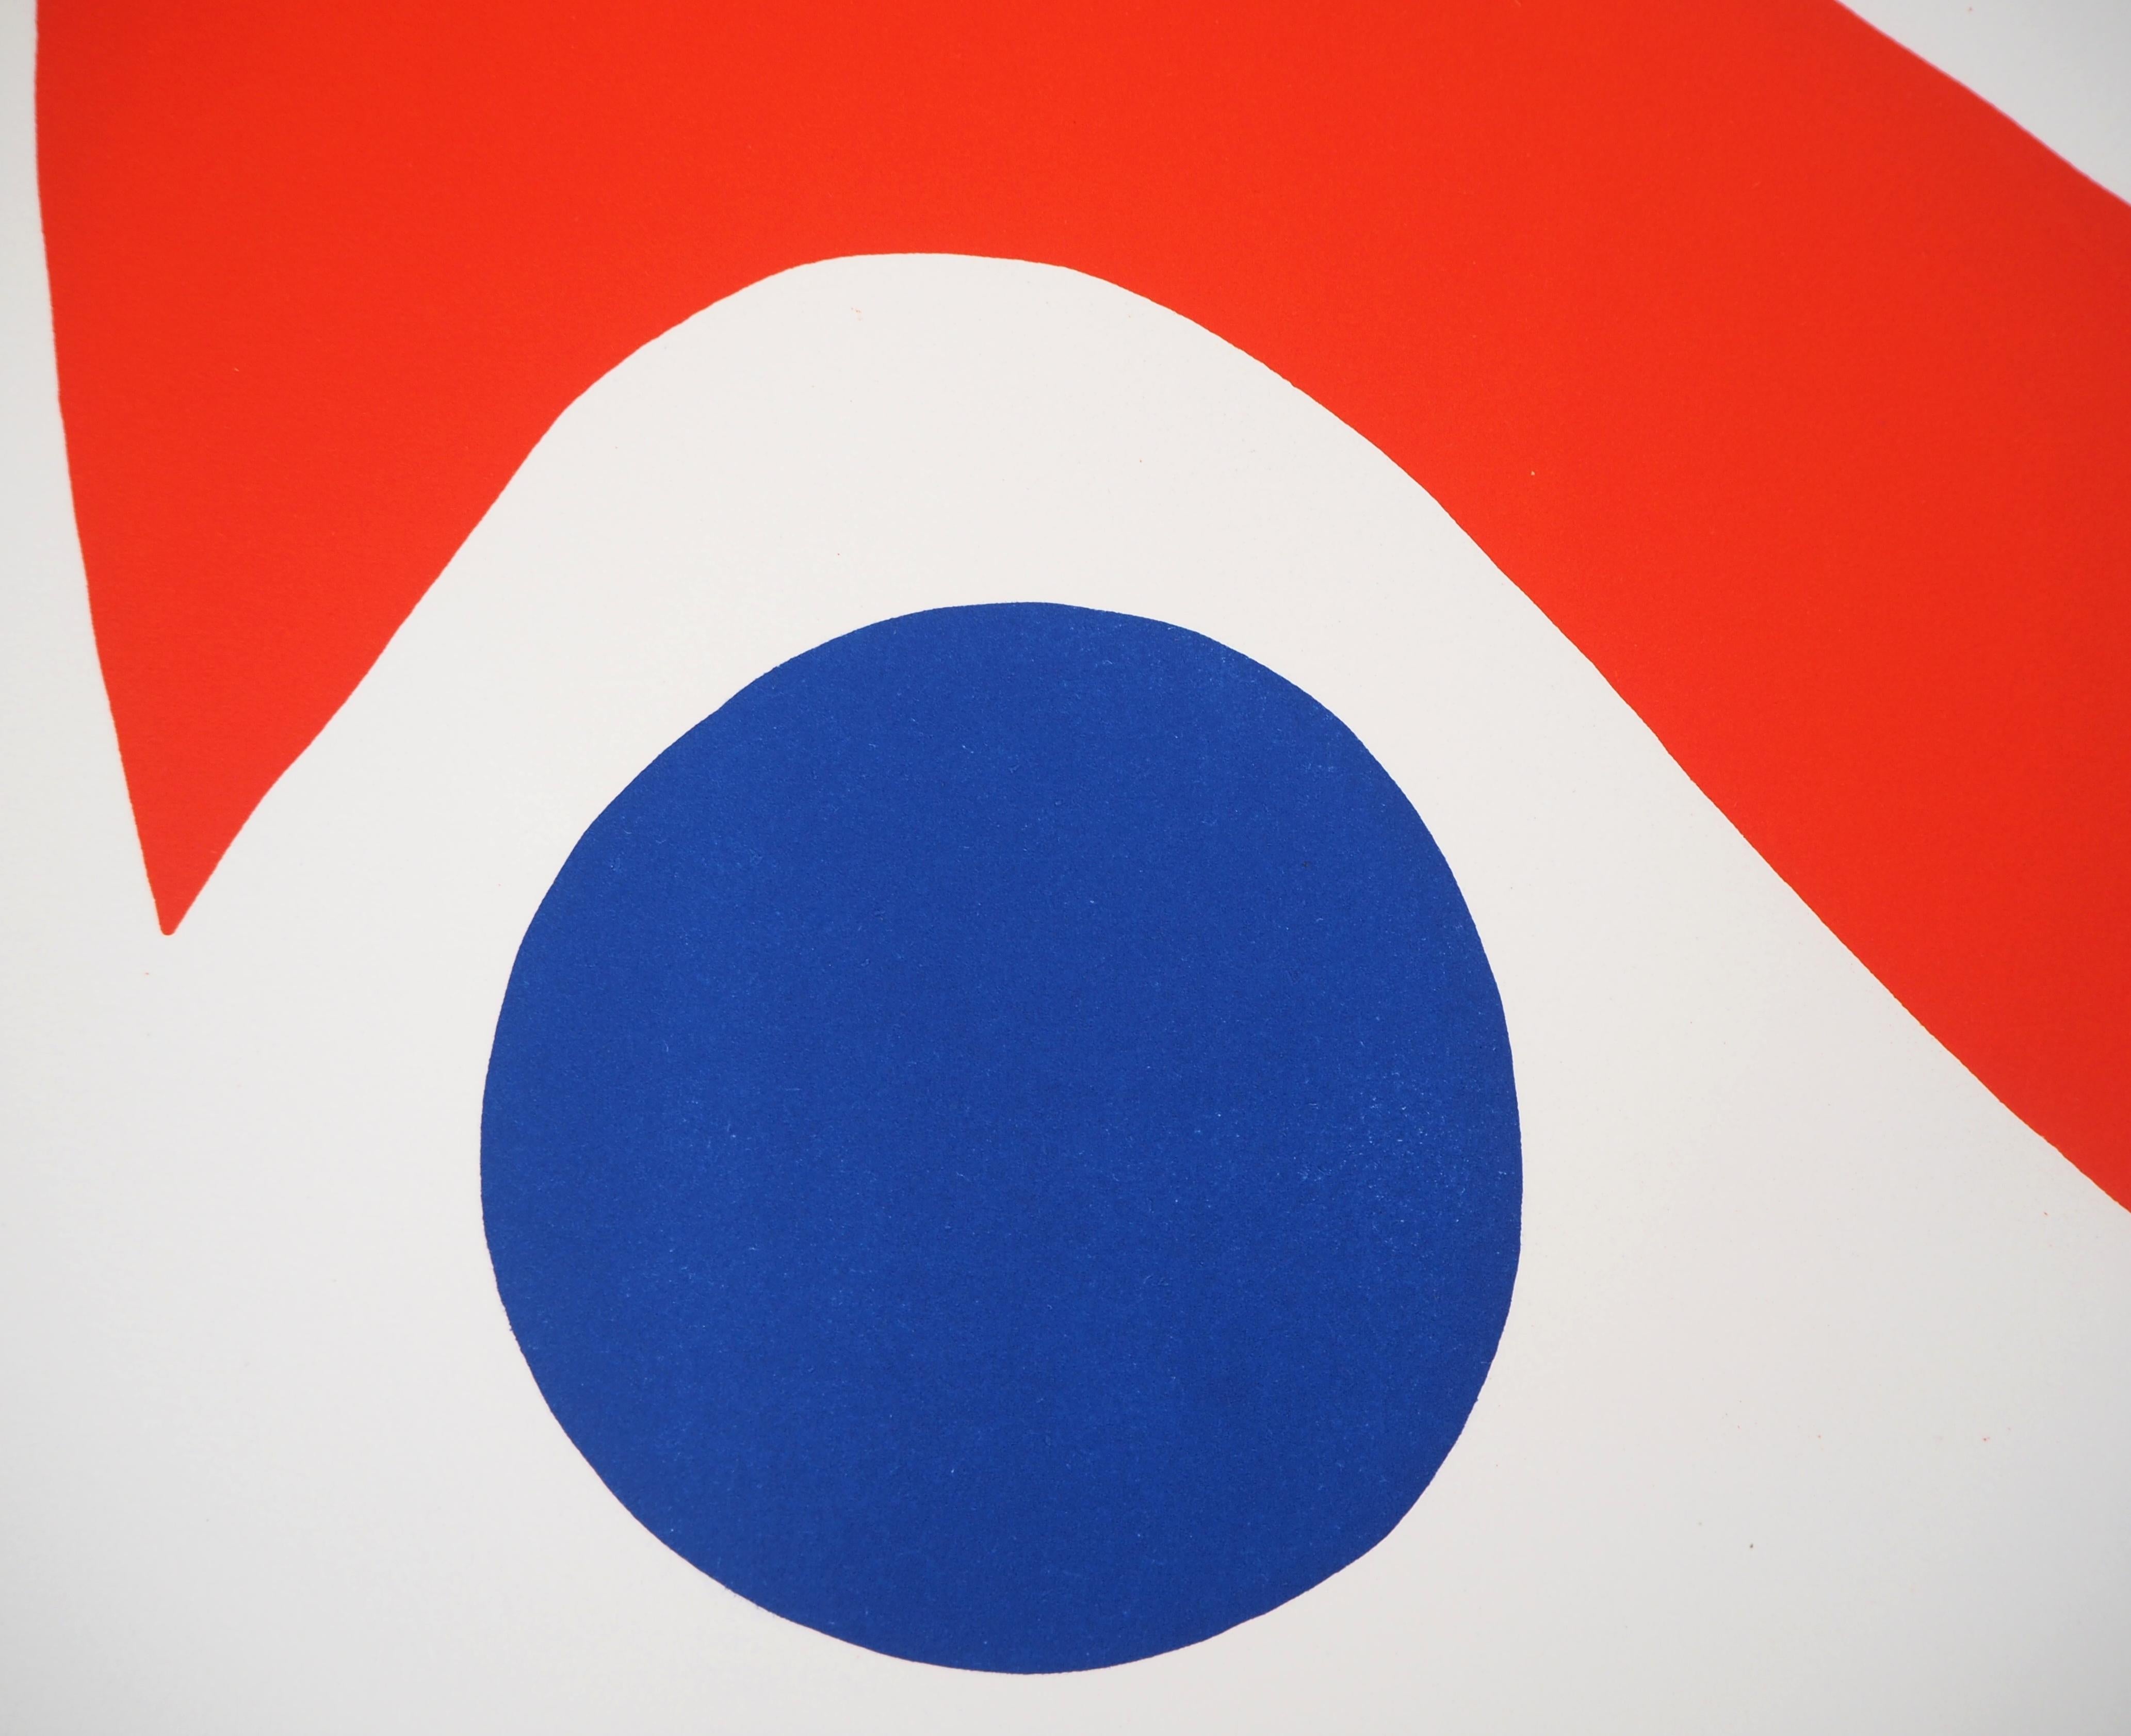 Flying Colors - Blue Balls, 1974 - Original lithograph, Signed - Gray Abstract Print by Alexander Calder